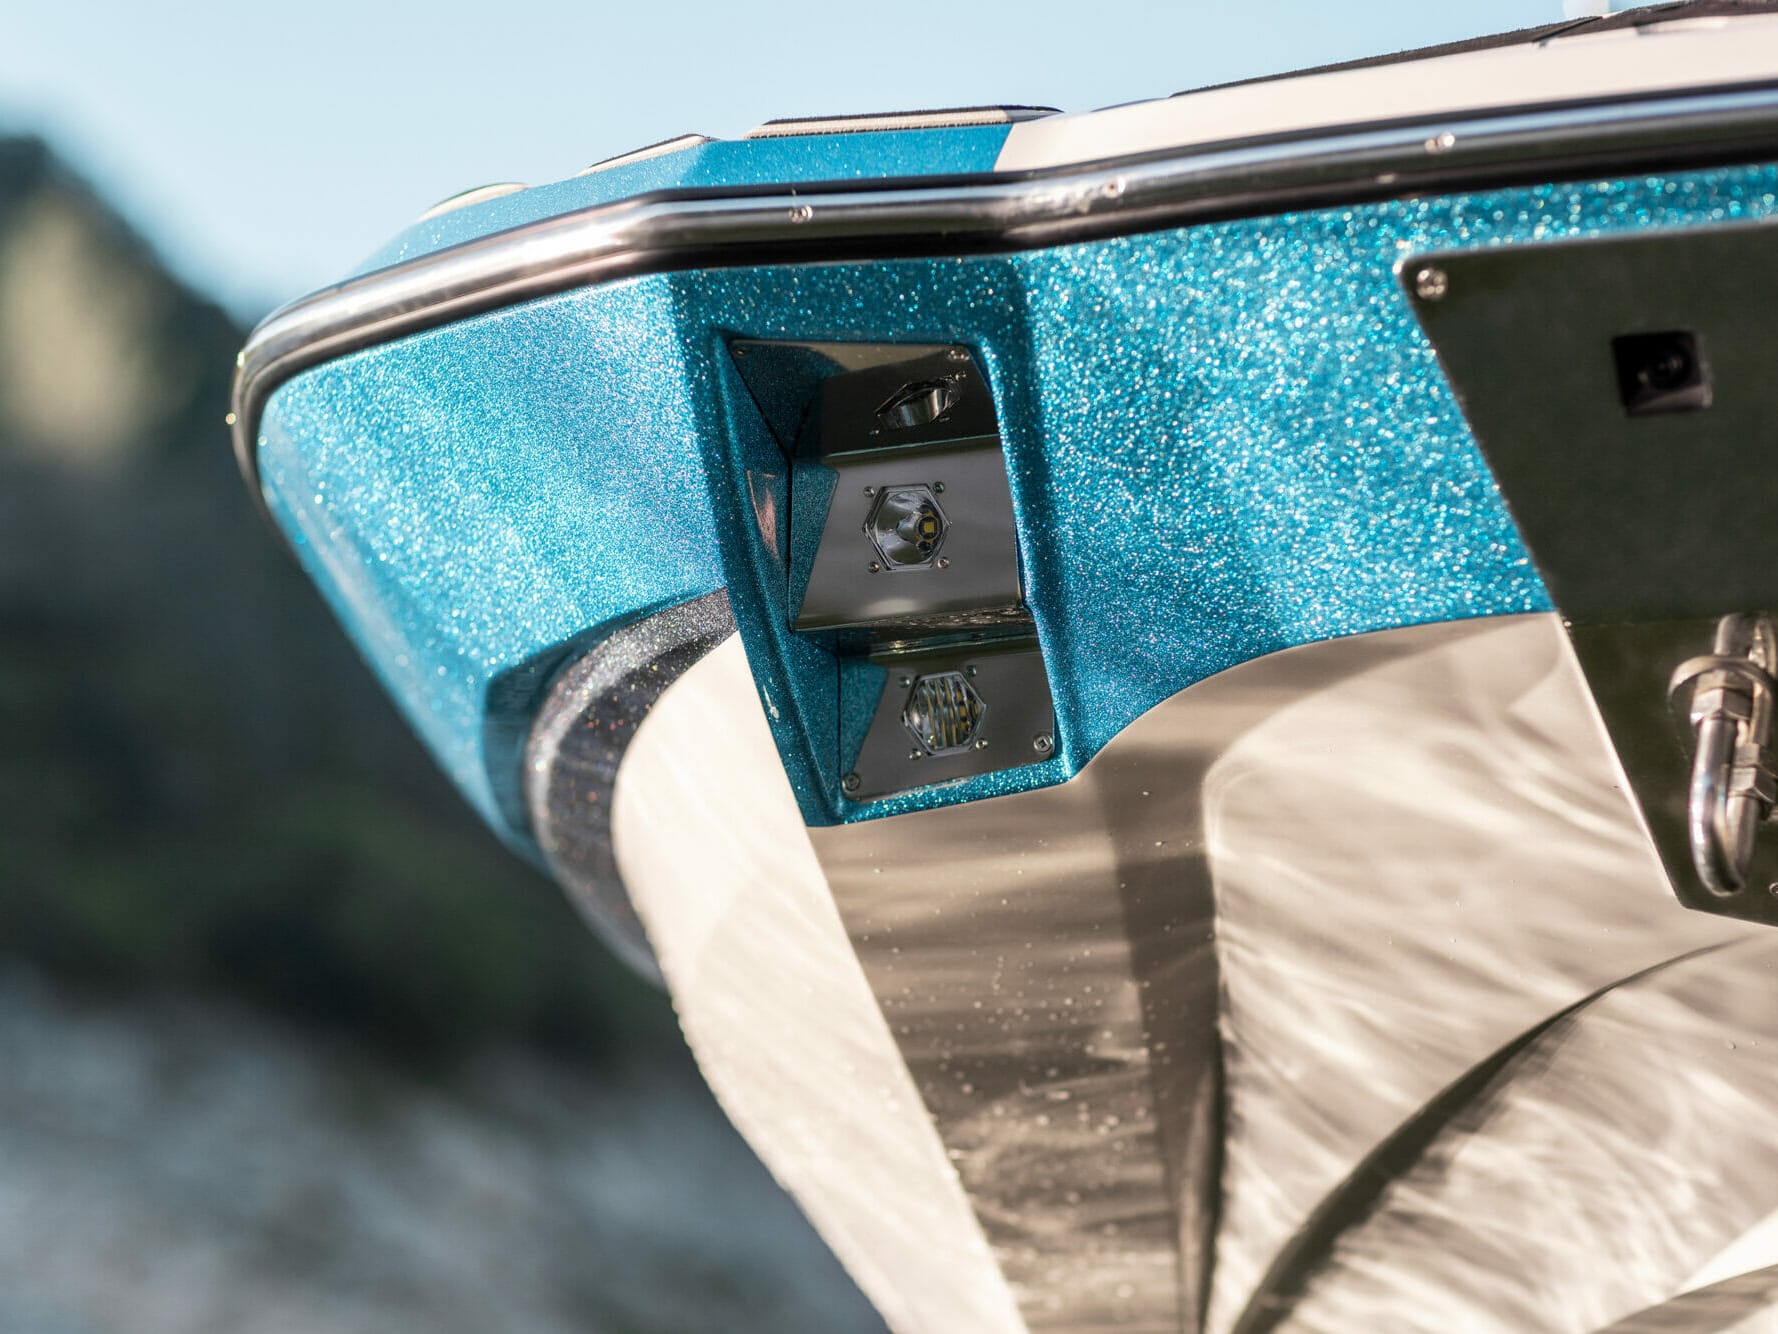 The front end of a wakesurf boat with a blue trim.